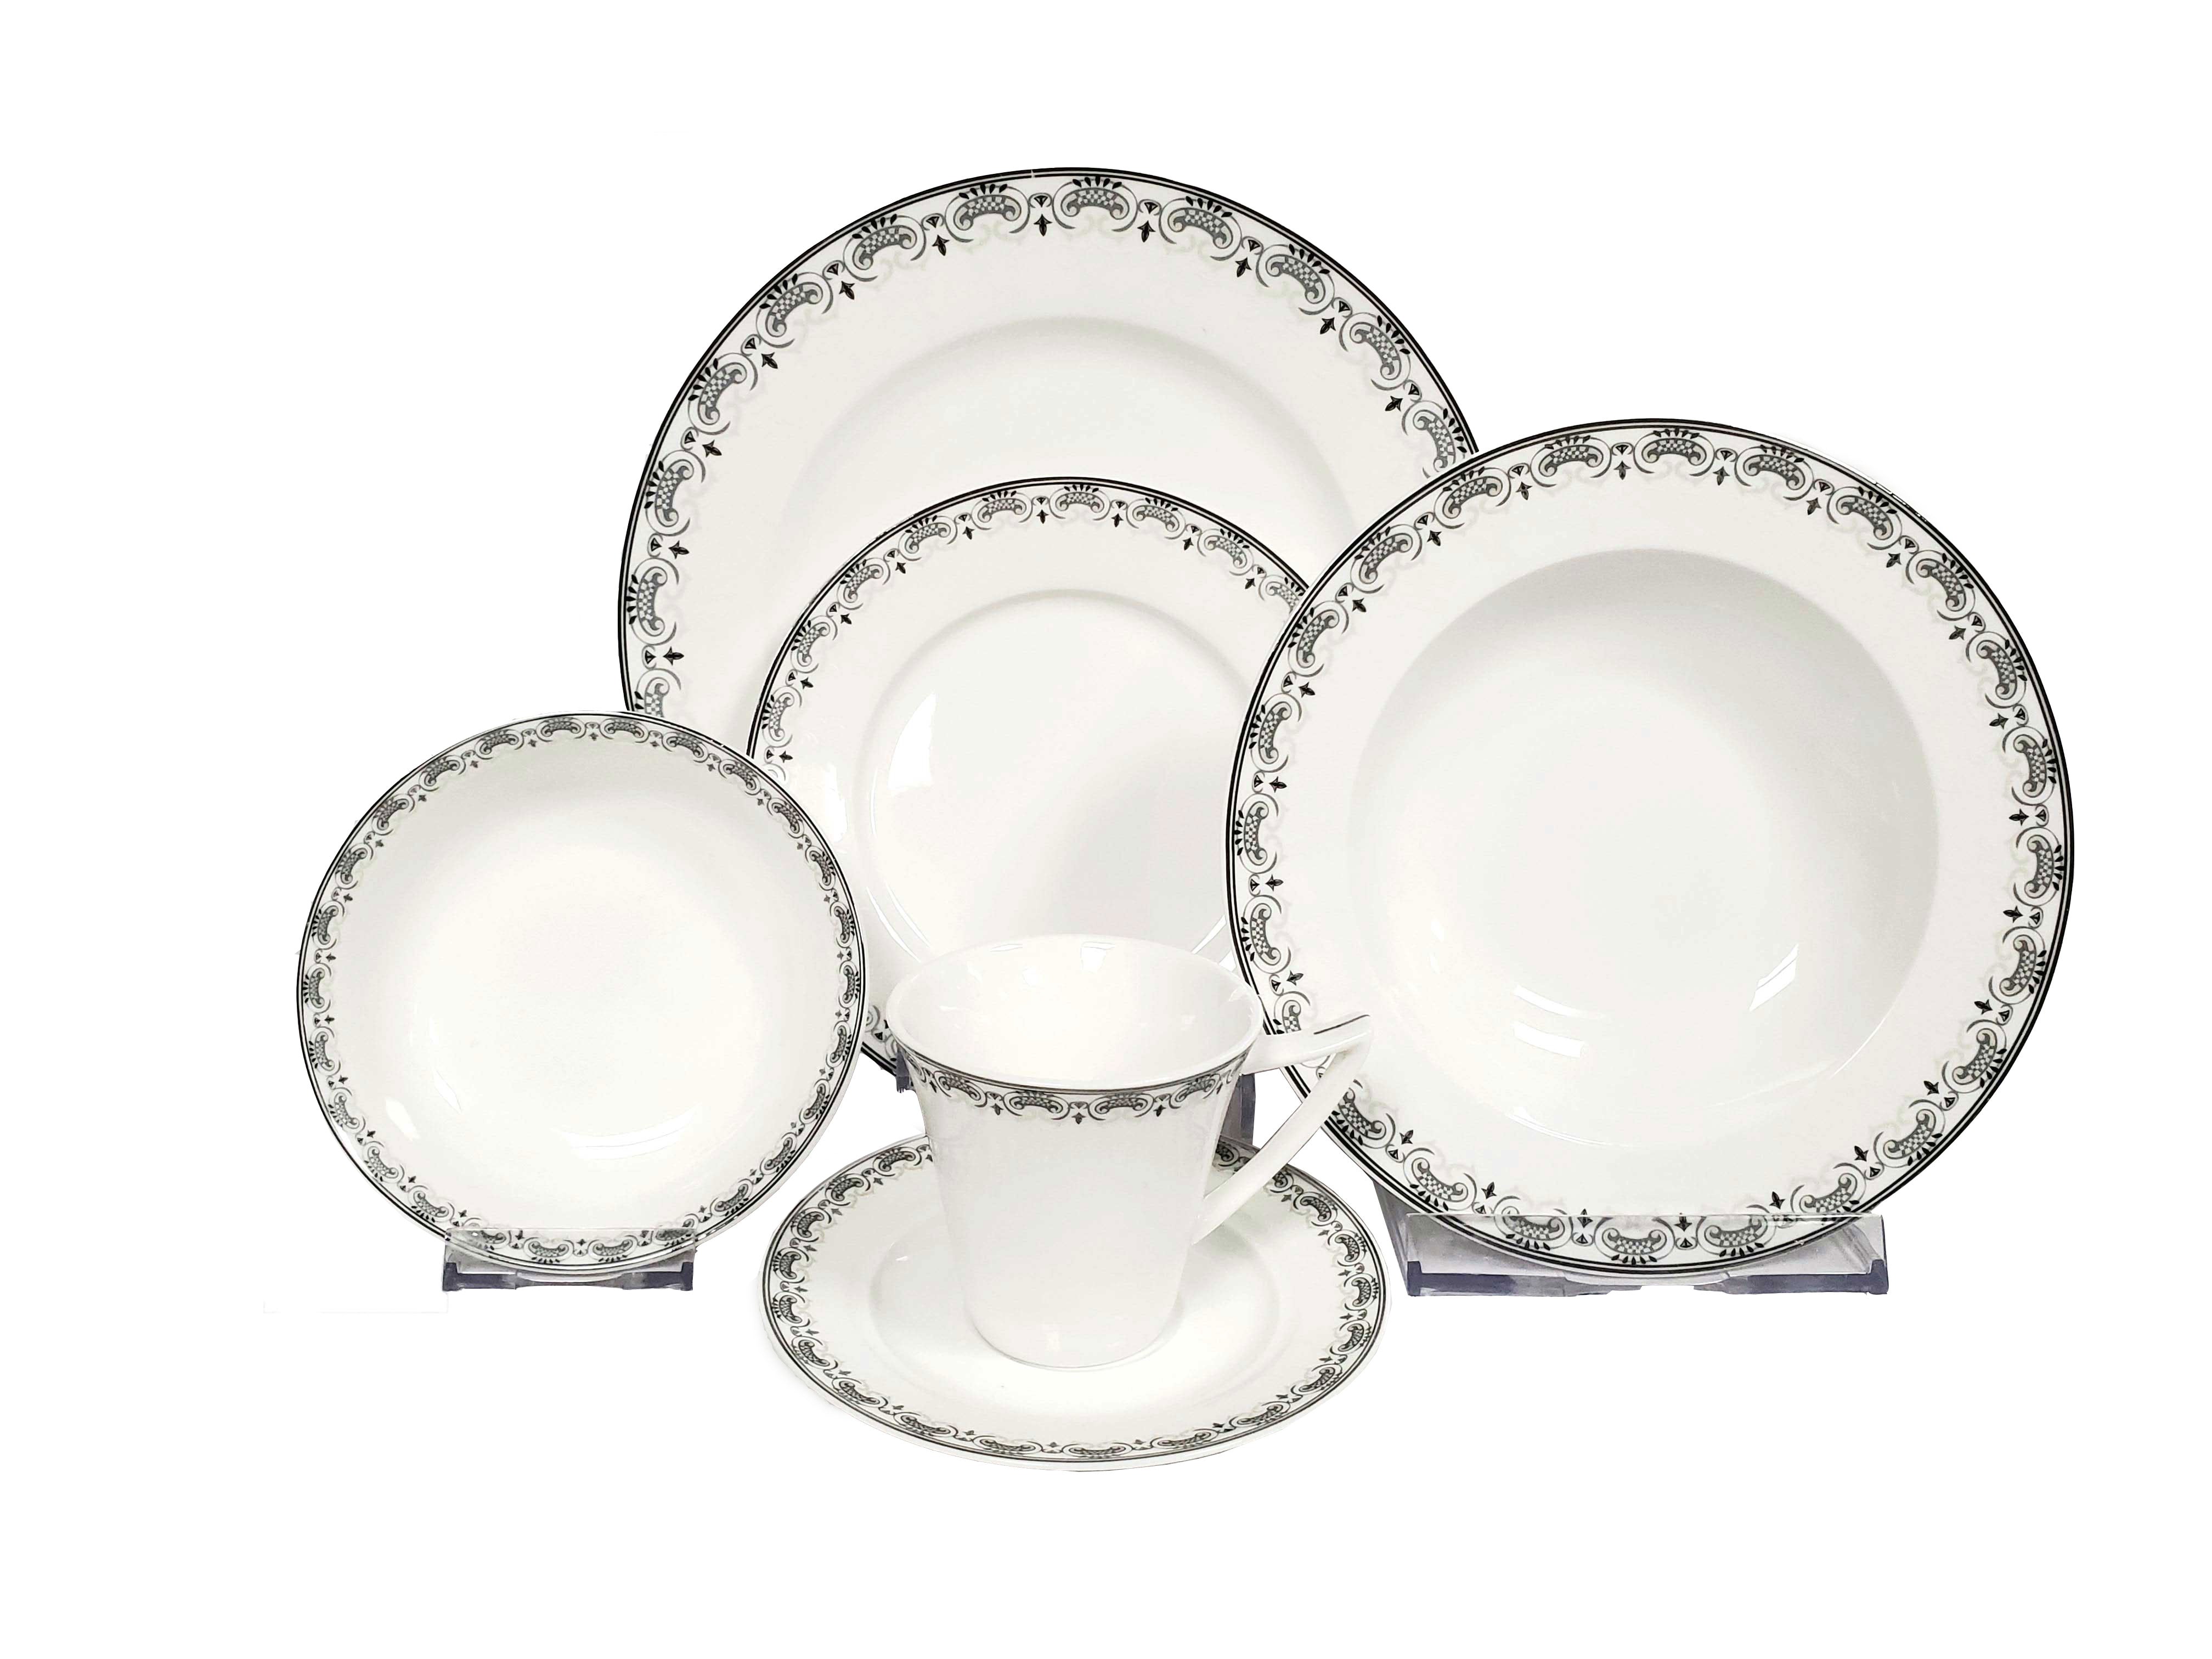 Dinnerware 86 piece set service for 12  Bone China (Winfield Platinum) By Success extra white body - Royal Gift